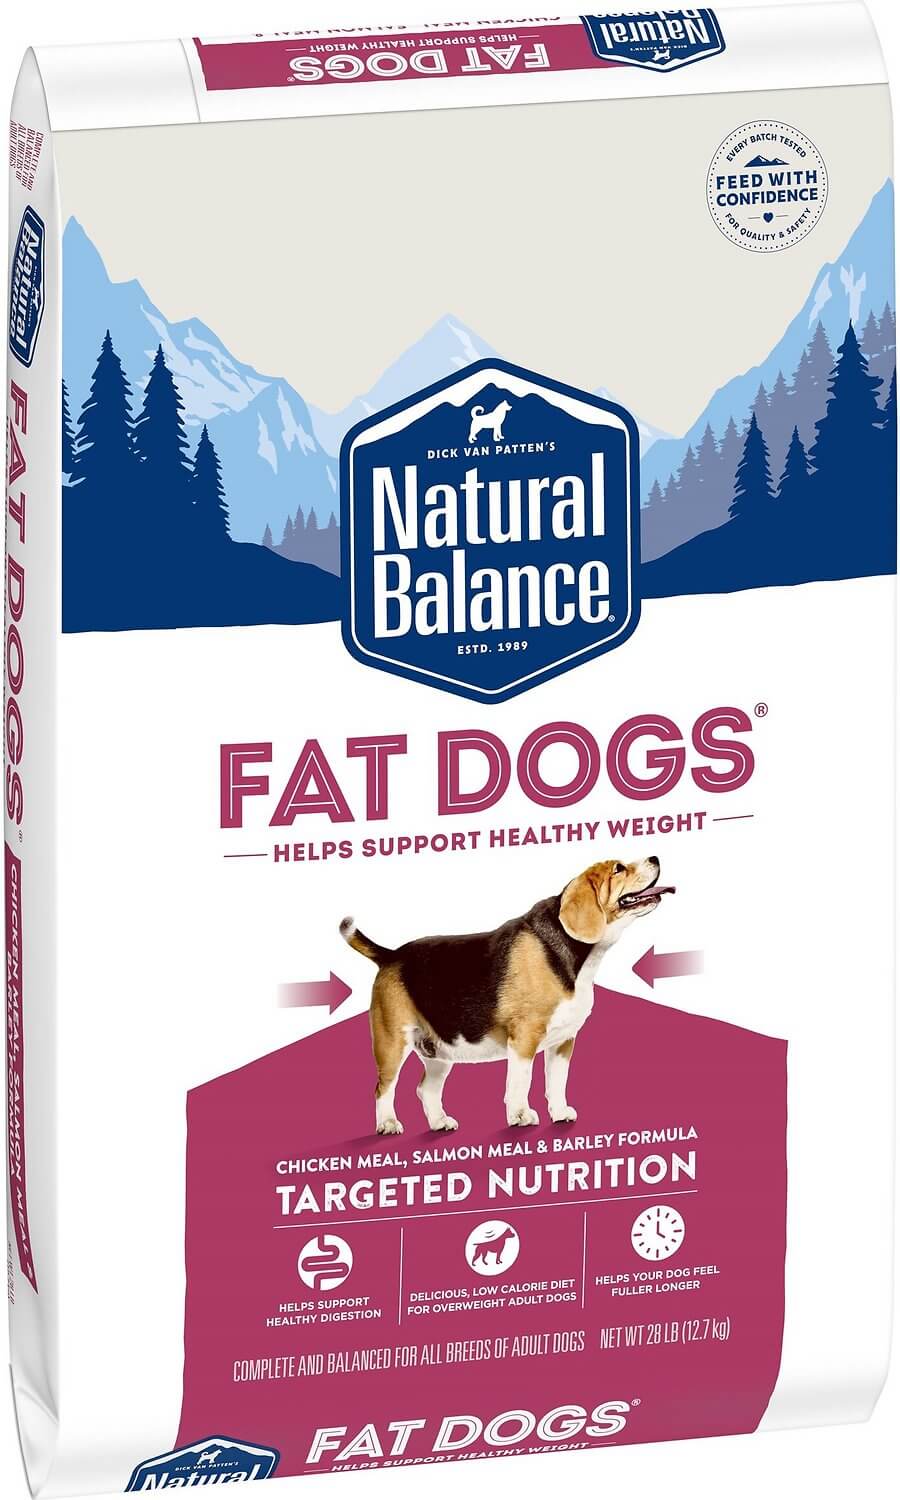 Natural Balance Fat Dogs Review (Dry)